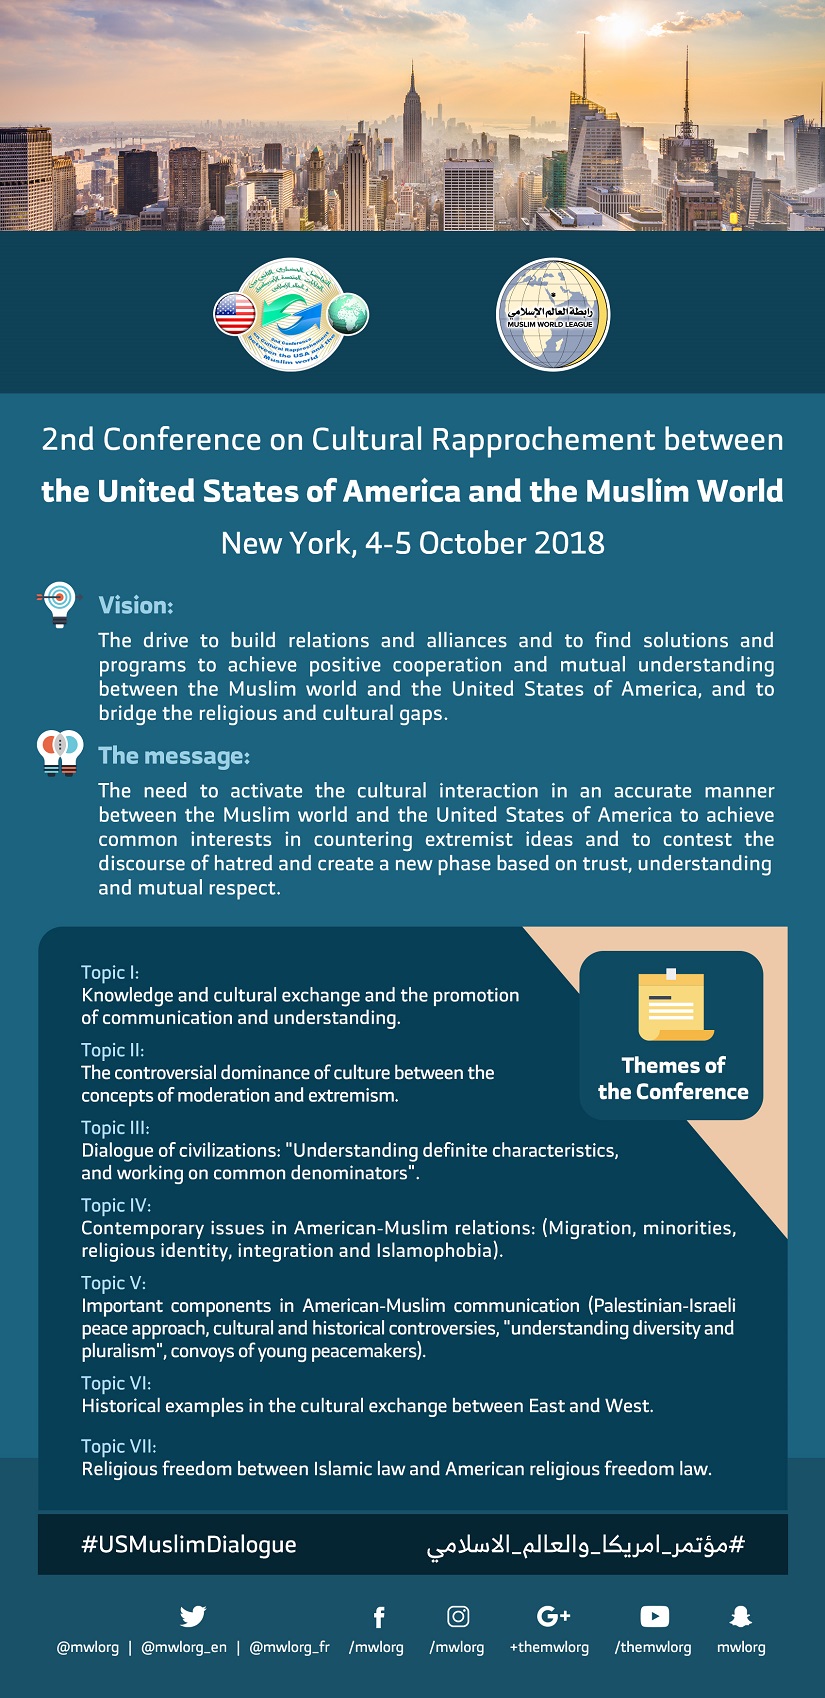 The conference on “Cultural Rapprochement between the Muslim World & the United States of America” 